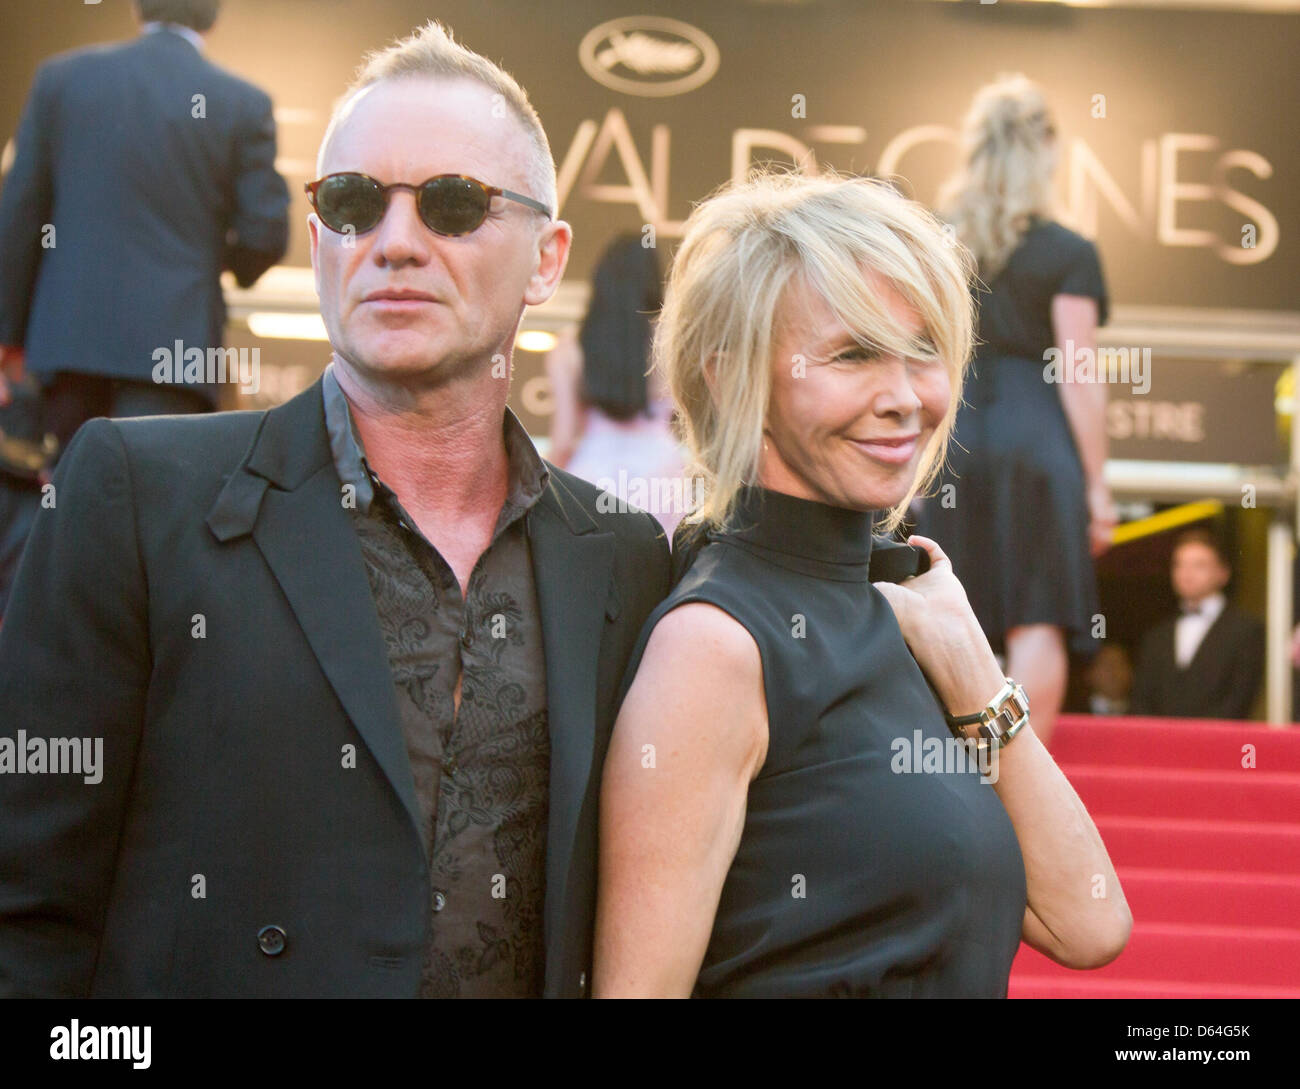 Singer Sting and his wife Trudie Styler arrive at the premiere of 'Mud' during the 65th Cannes Film Festival at Palais des Festivals in Cannes, France, on 26 May 2012. Photo: Hubert Boesl Stock Photo